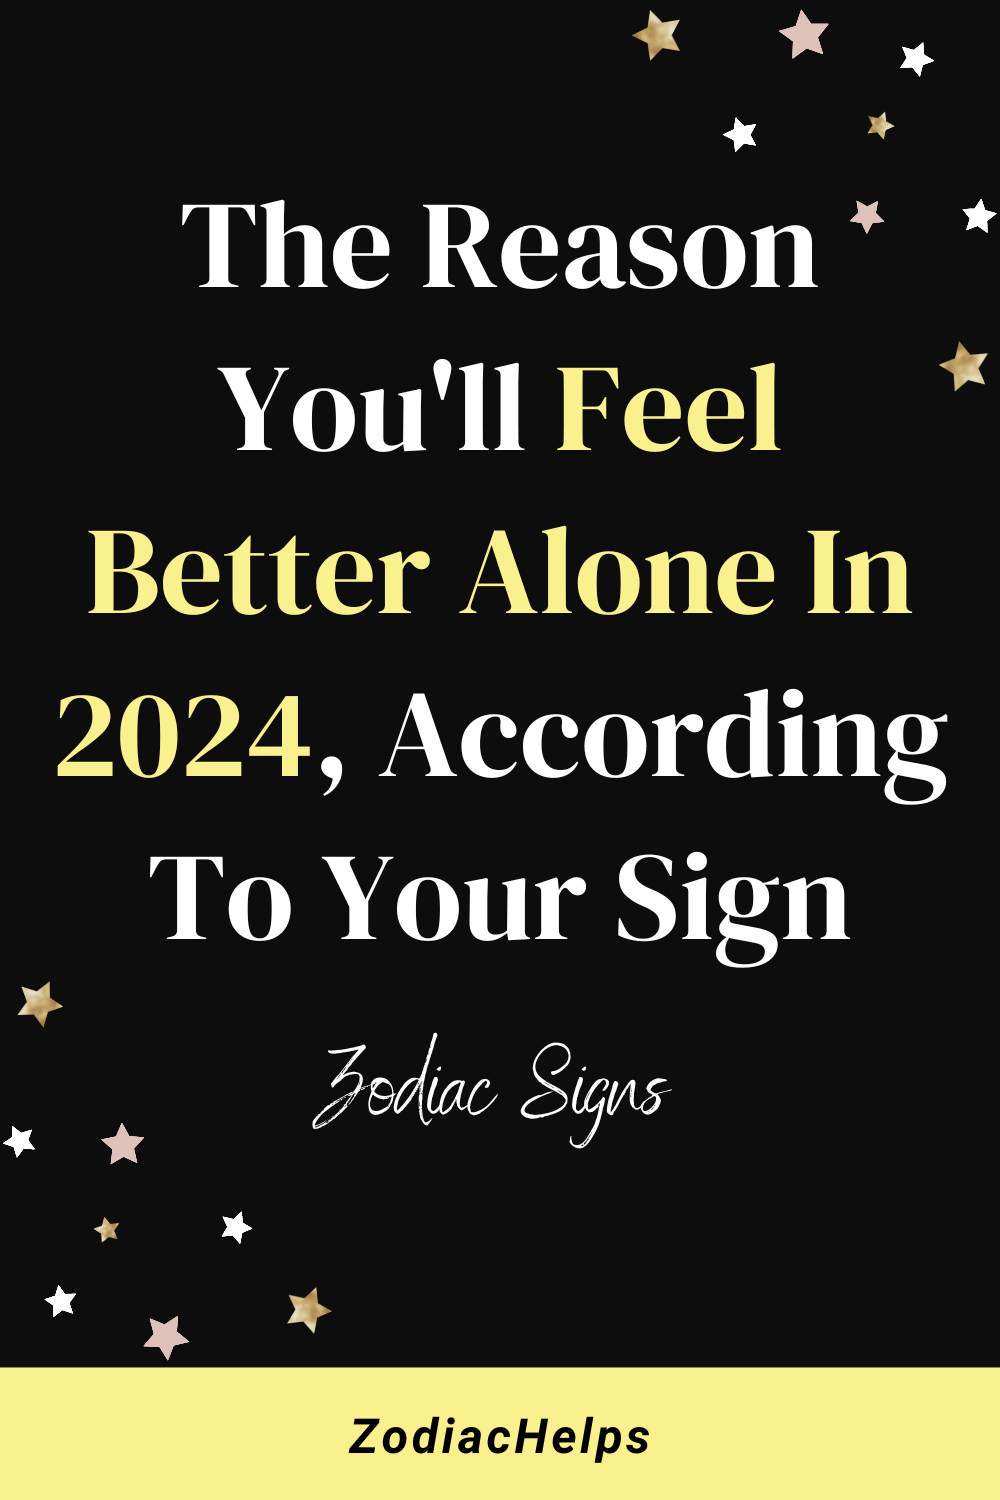 The Reason You'll Feel Better Alone In 2024, According To Your Sign